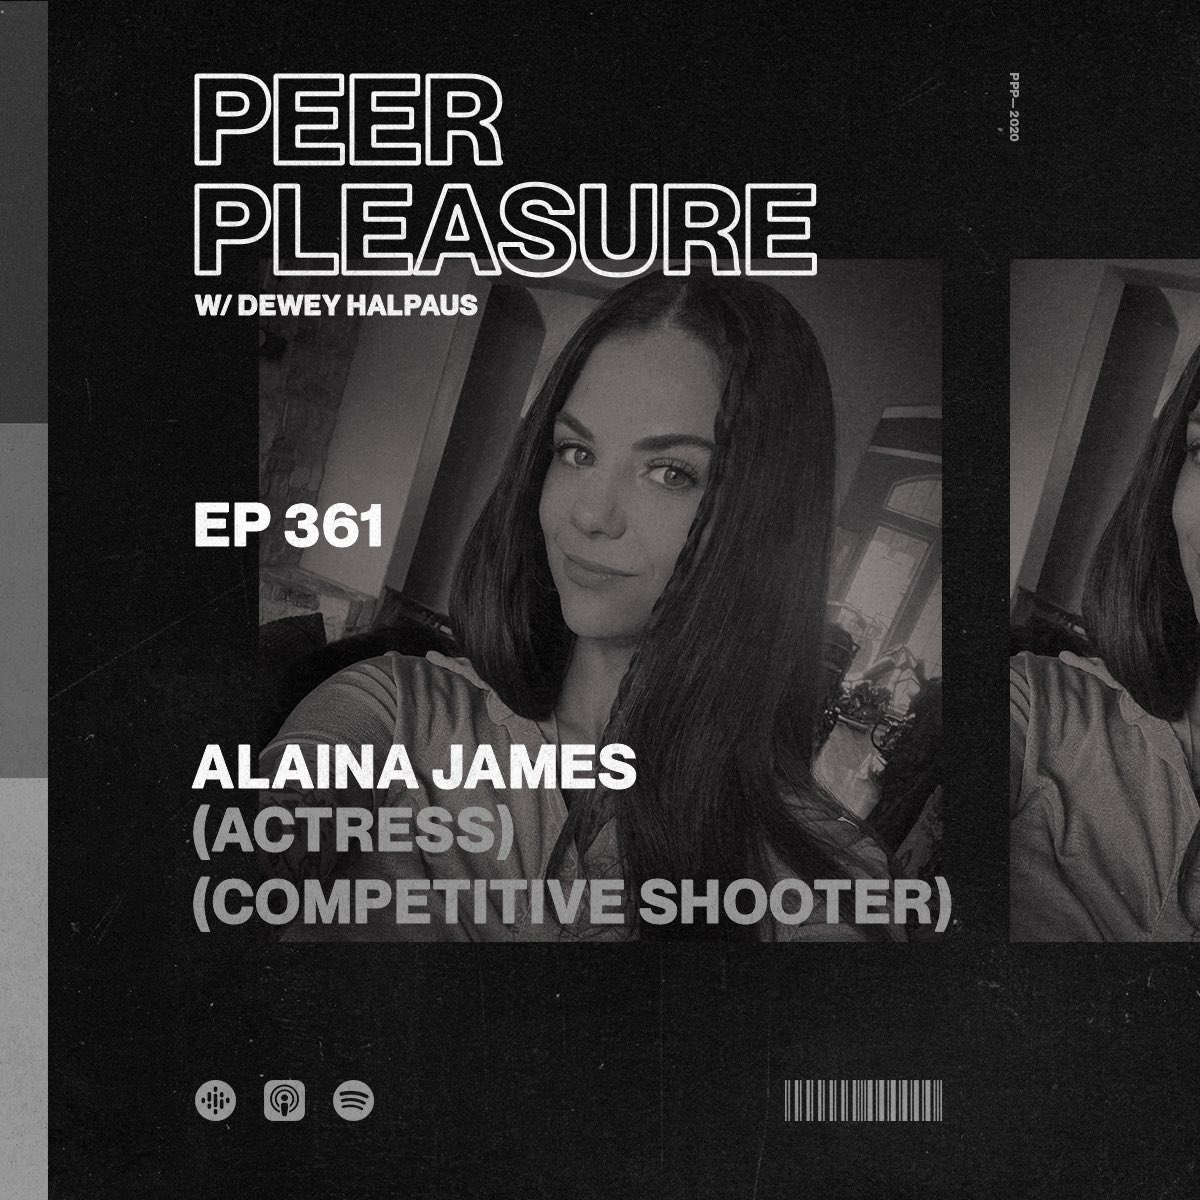 Episode 361 is up now with @thealainajames telling her incredible story about finding peace and true happiness through the darkness. From rural Ohio roots to stardom as Bonnie Rotten and now a world class competitive shooter, wife and mother. Don’t miss this story.